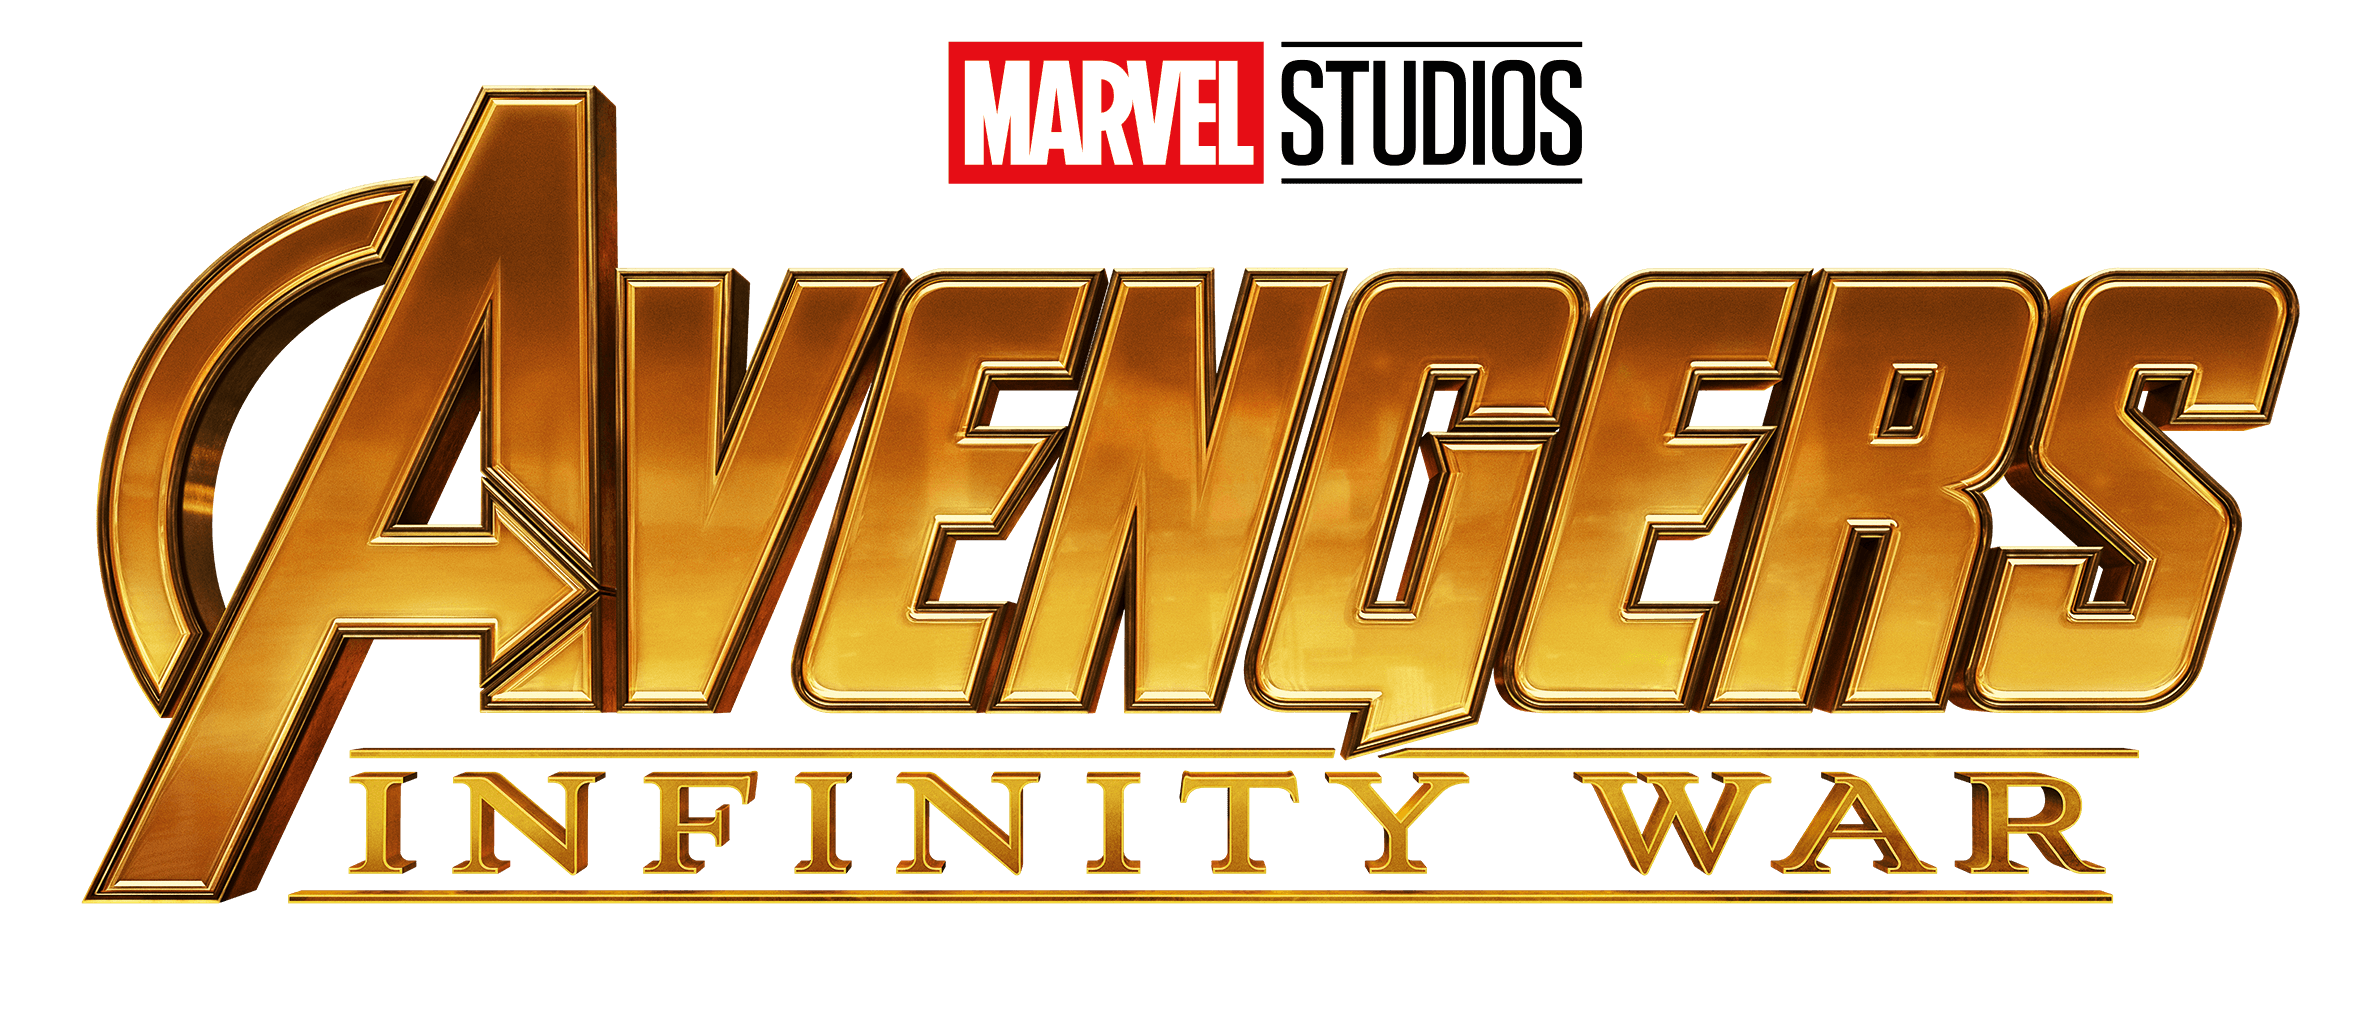 Avengers Infinity War Logo - Right now, I got access to the new official Infinity War Logo! Just